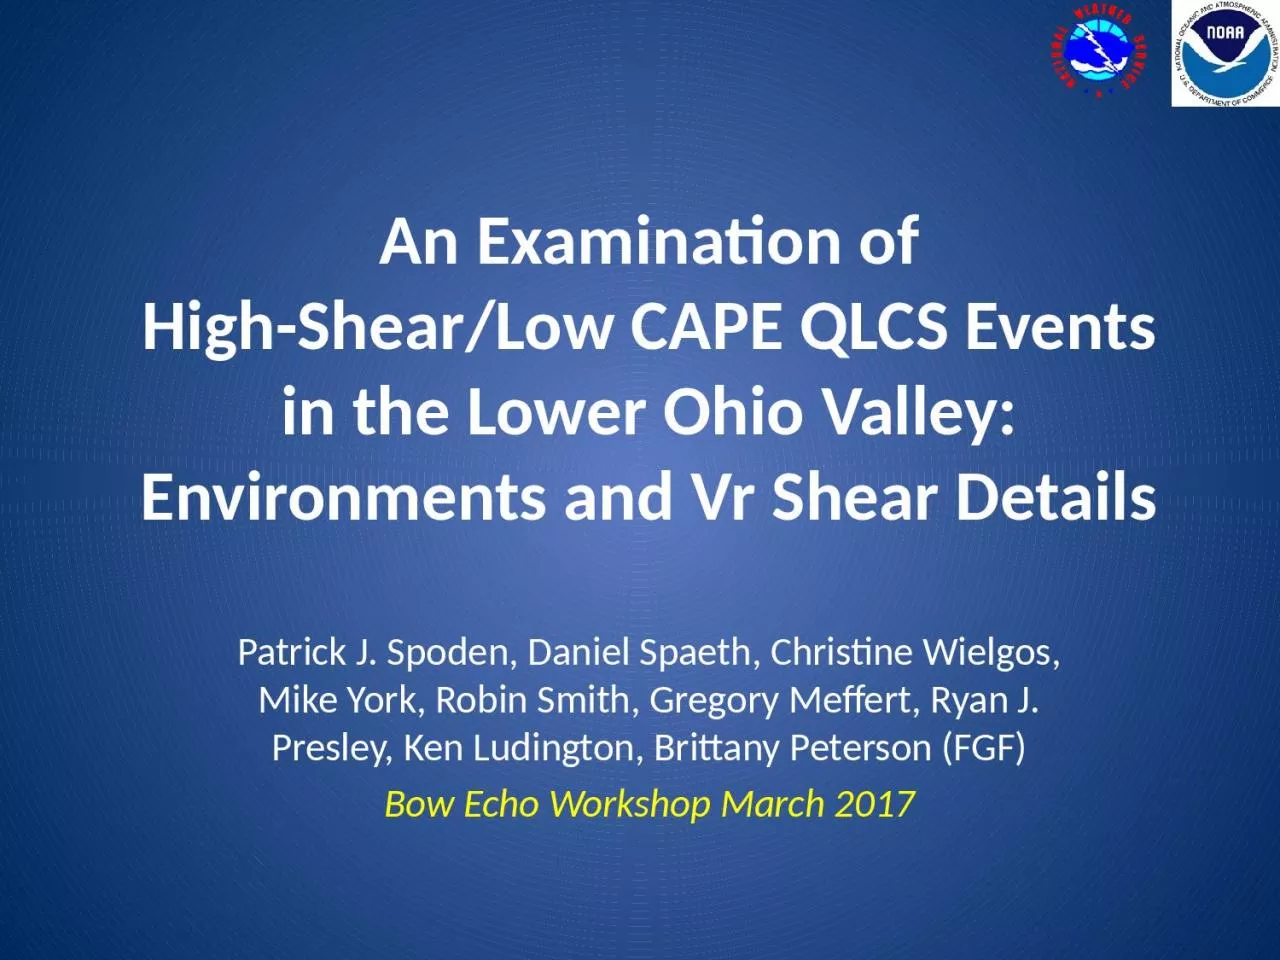 An Examination of High-Shear/Low CAPE QLCS Events in the Lower Ohio Valley: Environments